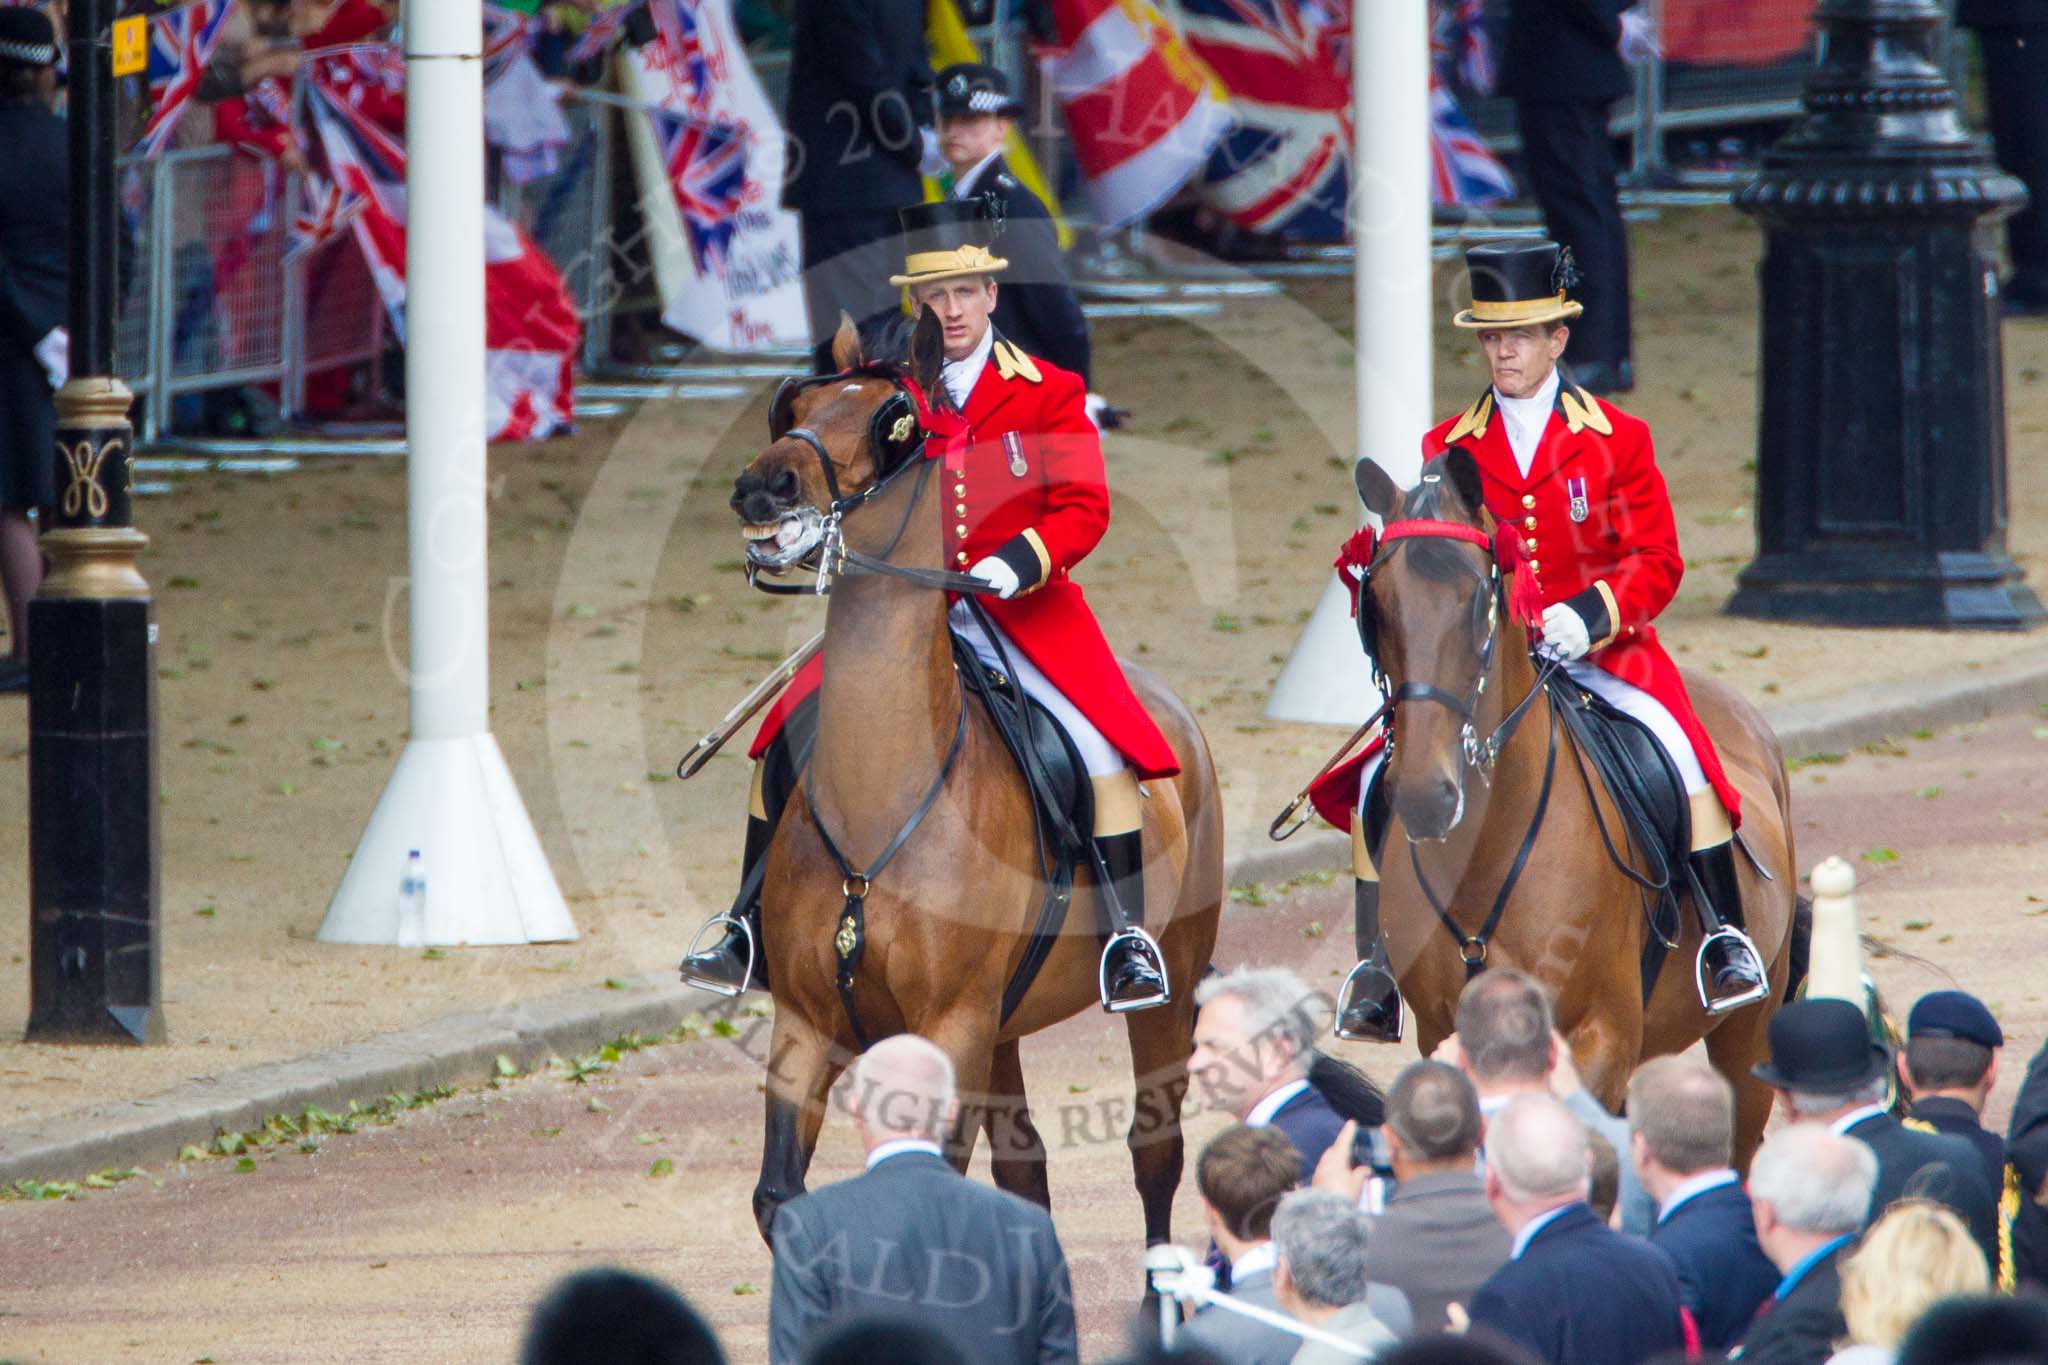 Trooping the Colour 2013: Two grooms are leading the line of coaches carrying members of the Royal Family across Horse Guards Parade. Image #180, 15 June 2013 10:48 Horse Guards Parade, London, UK